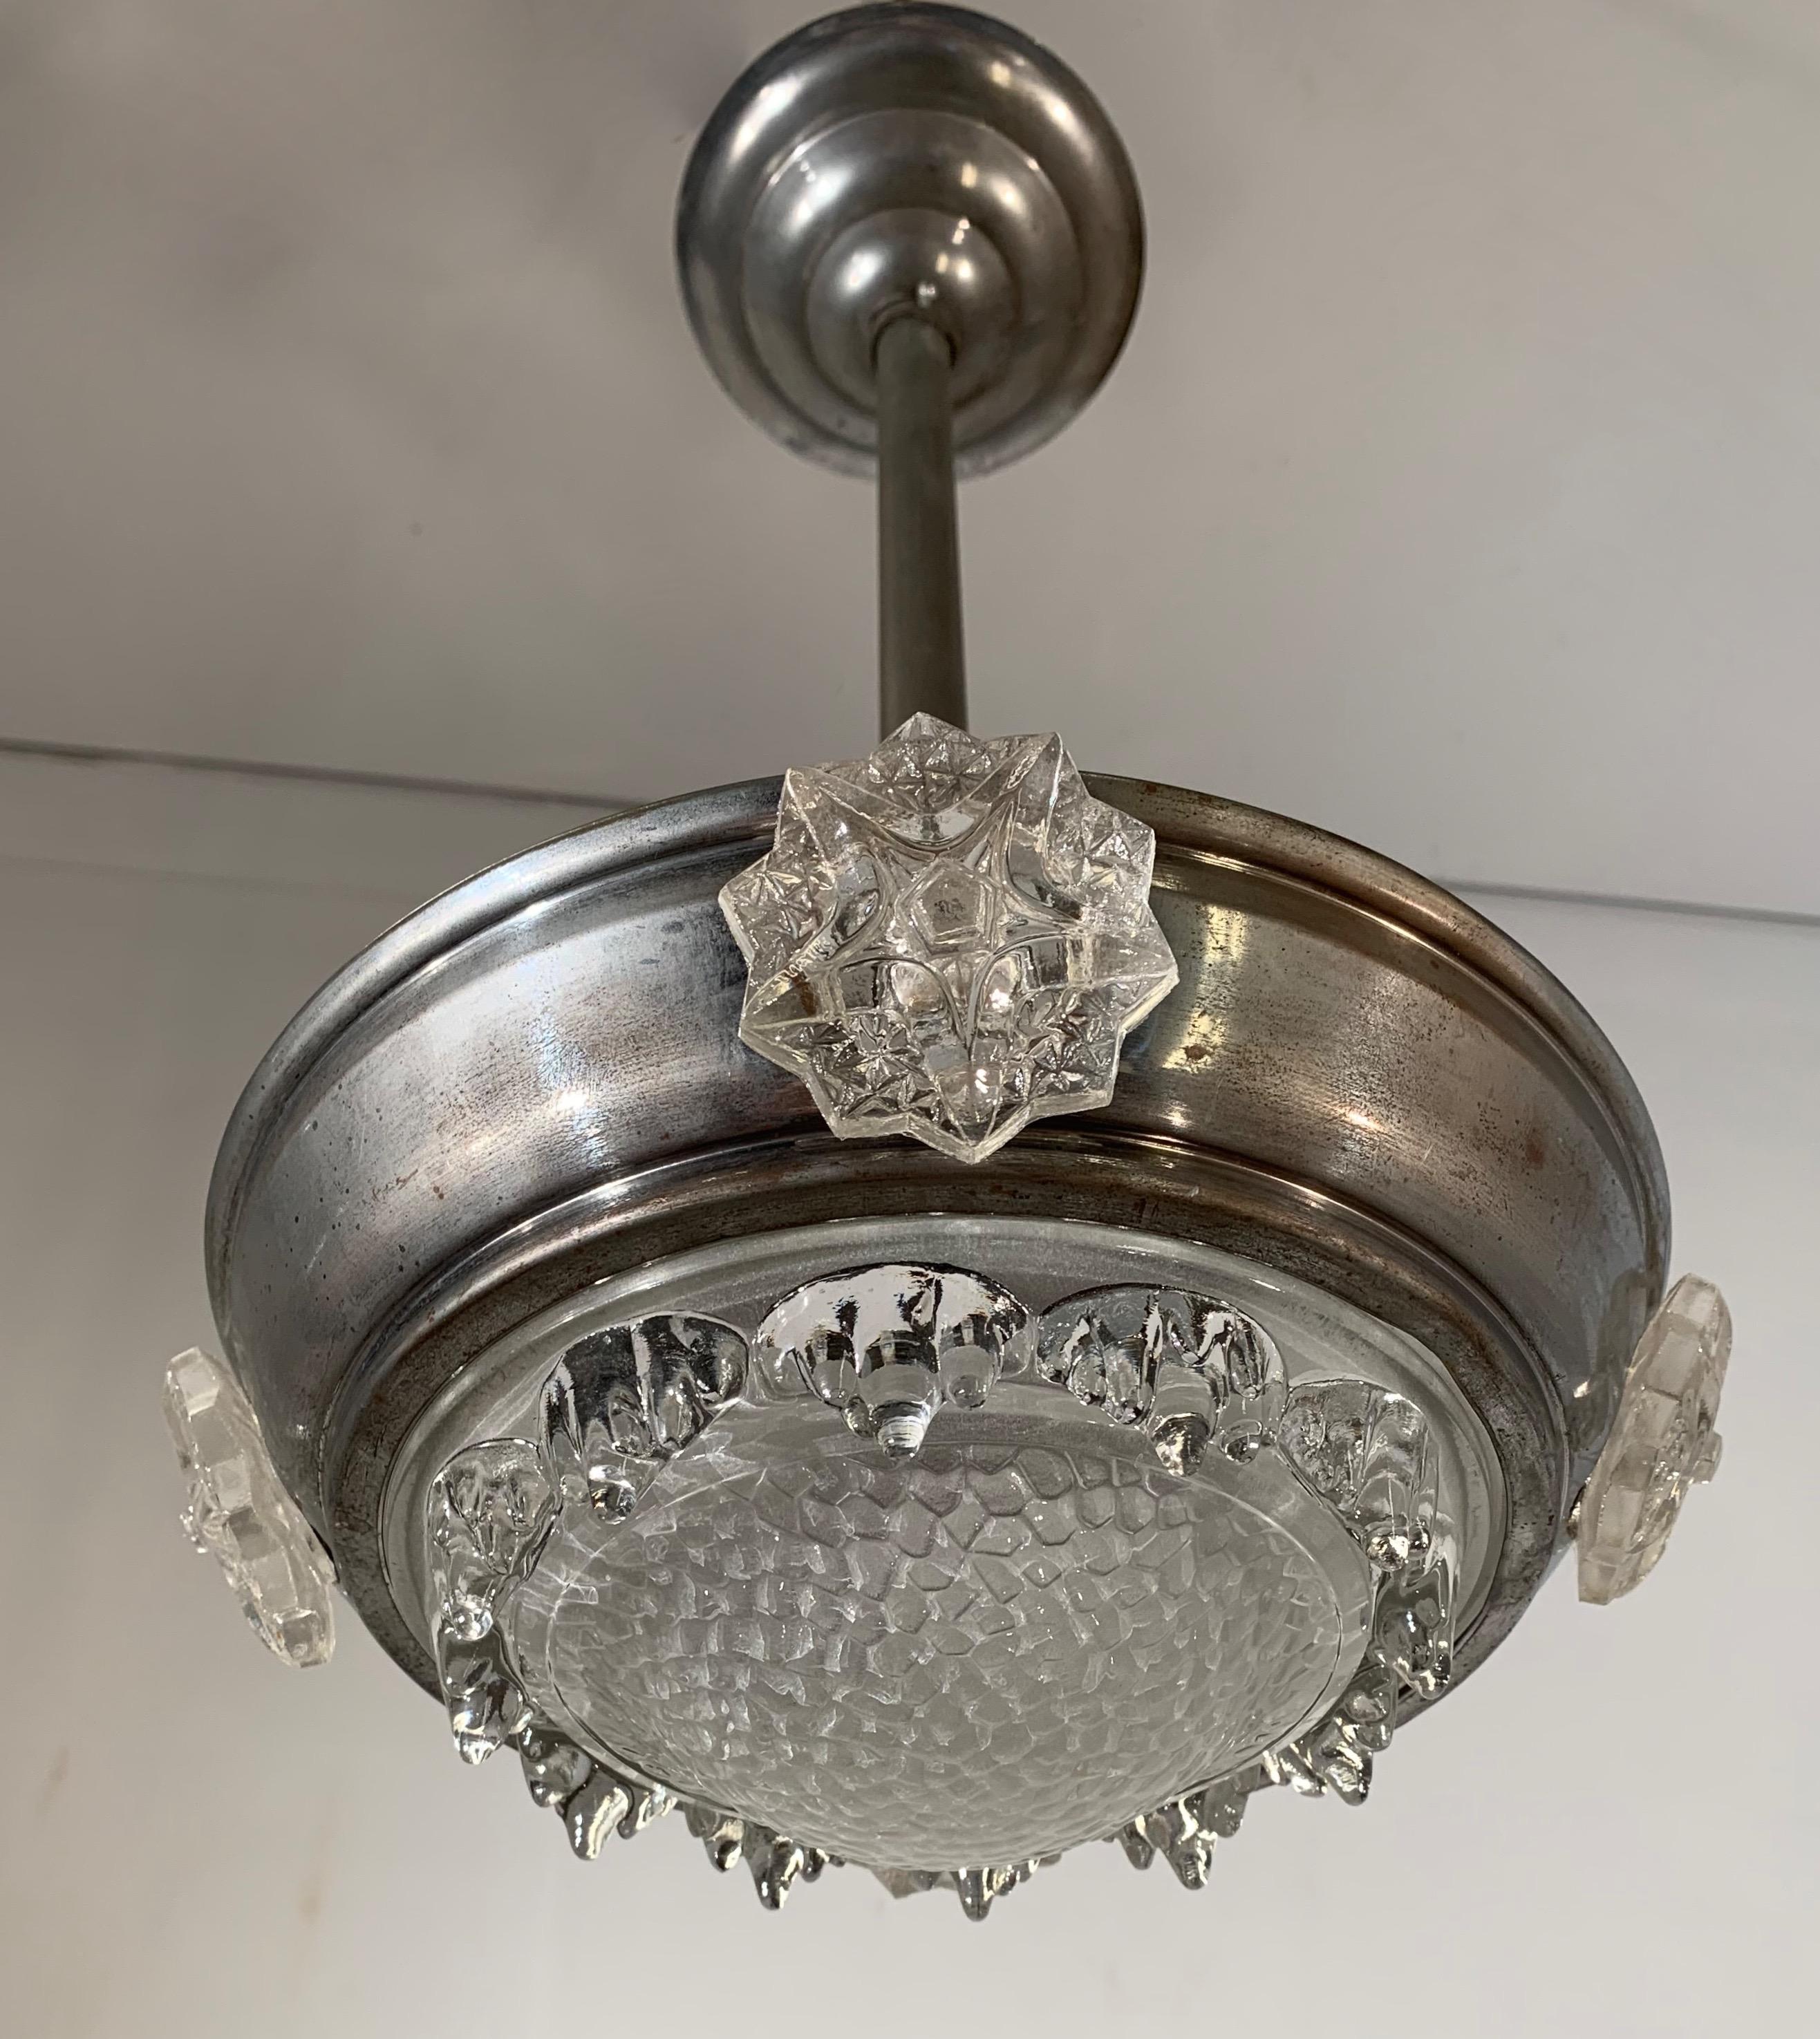 Very stylish and rare, 1920s Art Deco pendant, marked Ezan France.

If you are looking for a stylish and eye-catching pendant to grace your home or office then this 'icy Art Deco light' could be perfect, because the wonderful design and the